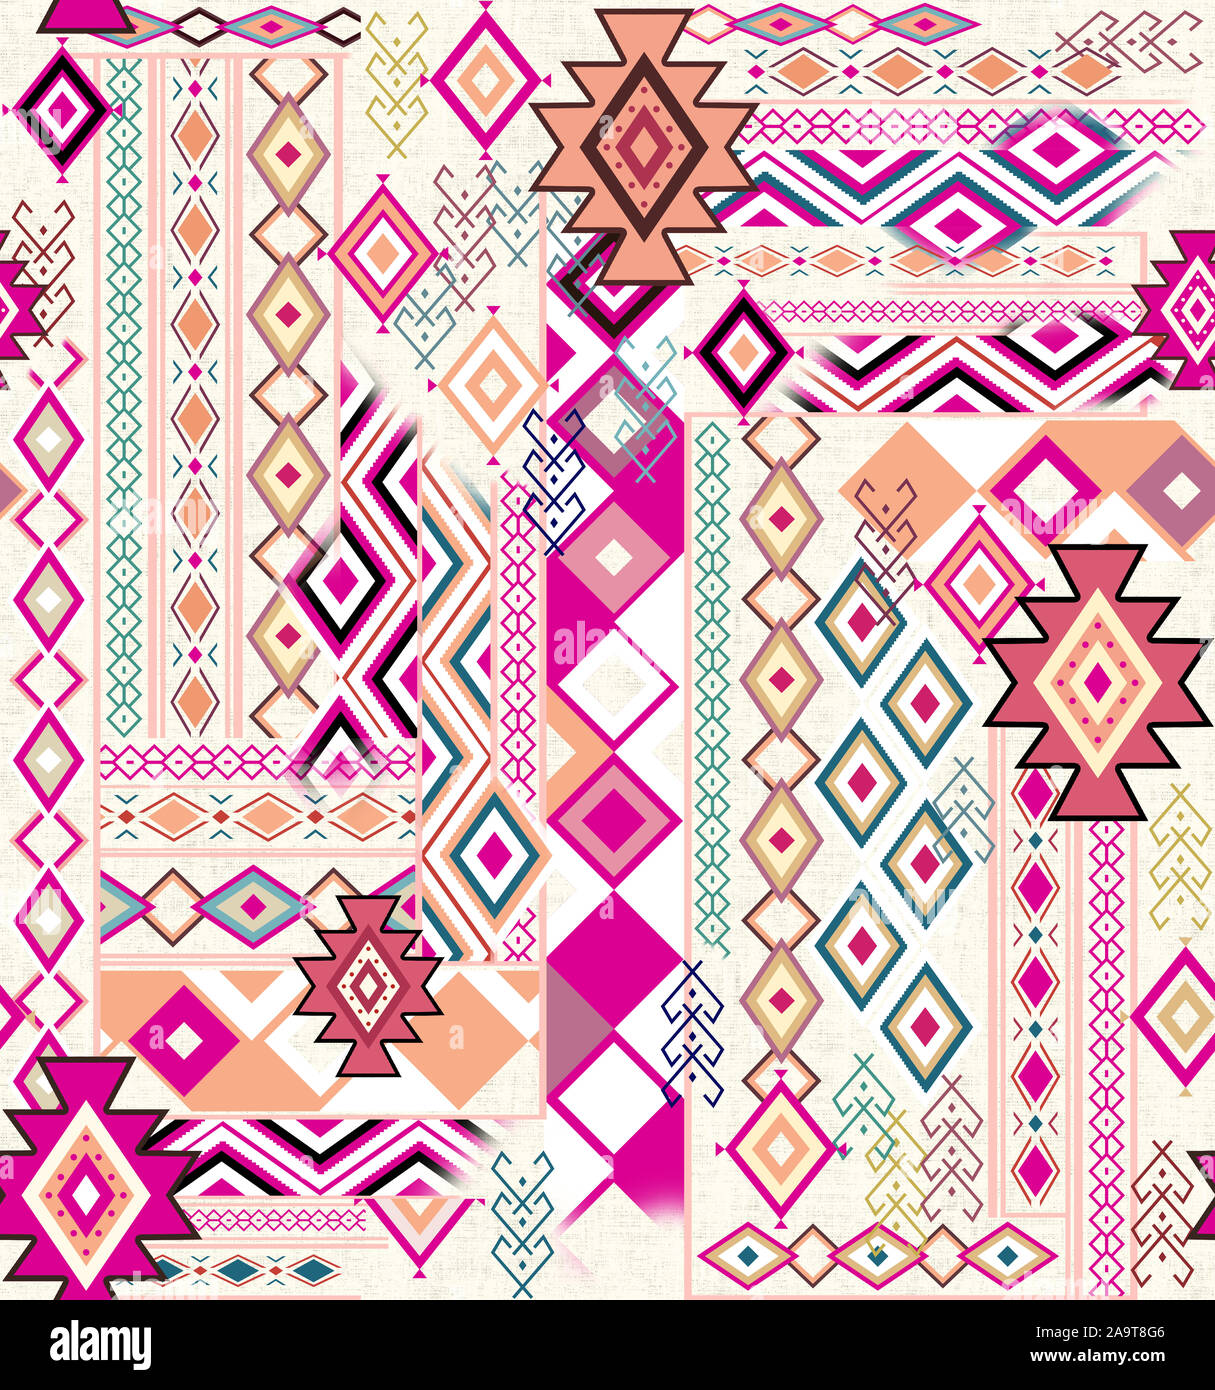 Seamless background pattern. Patchwork pattern with light colors diamonds ornament patterns. Ethnic indian style. Stock Photo